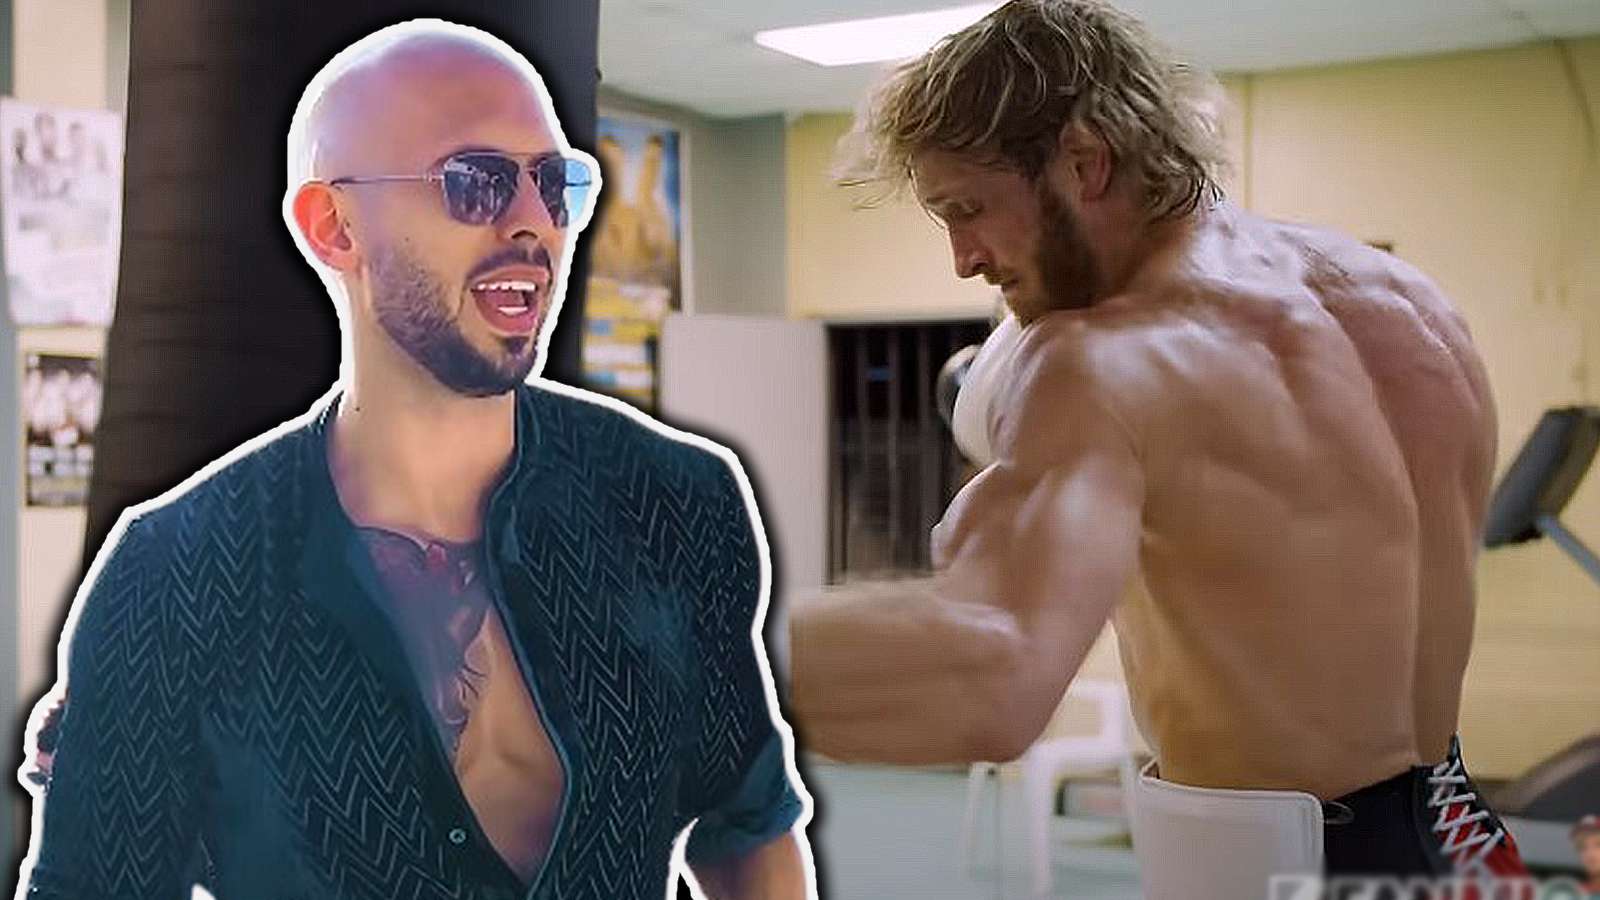 Andrew Tate accuses Logan Paul of being on steroids in latest boxing callout